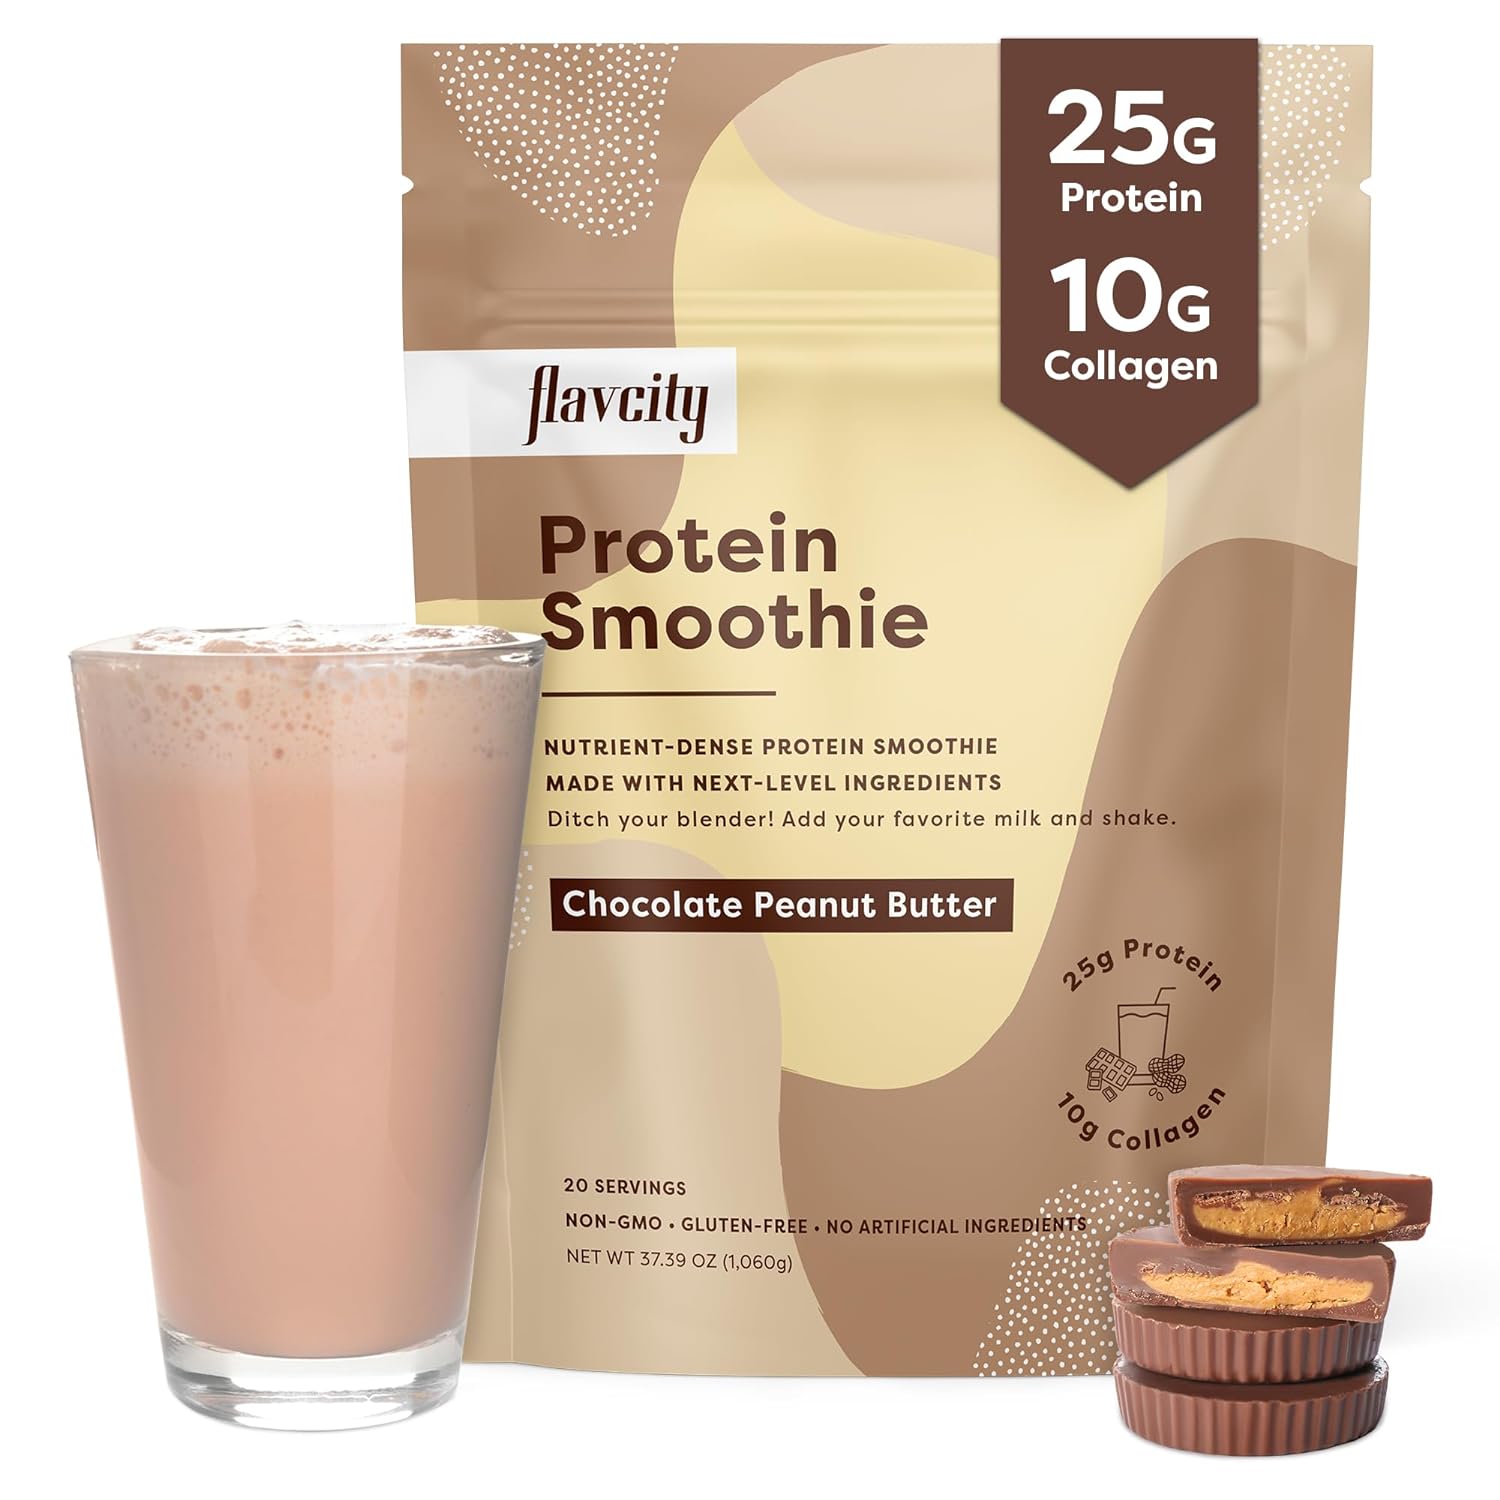 FlavCity Protein Powder Smoothie, Chocolate Peanut Butter - 100% Grass-Fed Whey Protein Smoothie with Collagen (25g of Protein) - Gluten Free & No Added Sugars (37.39 oz)